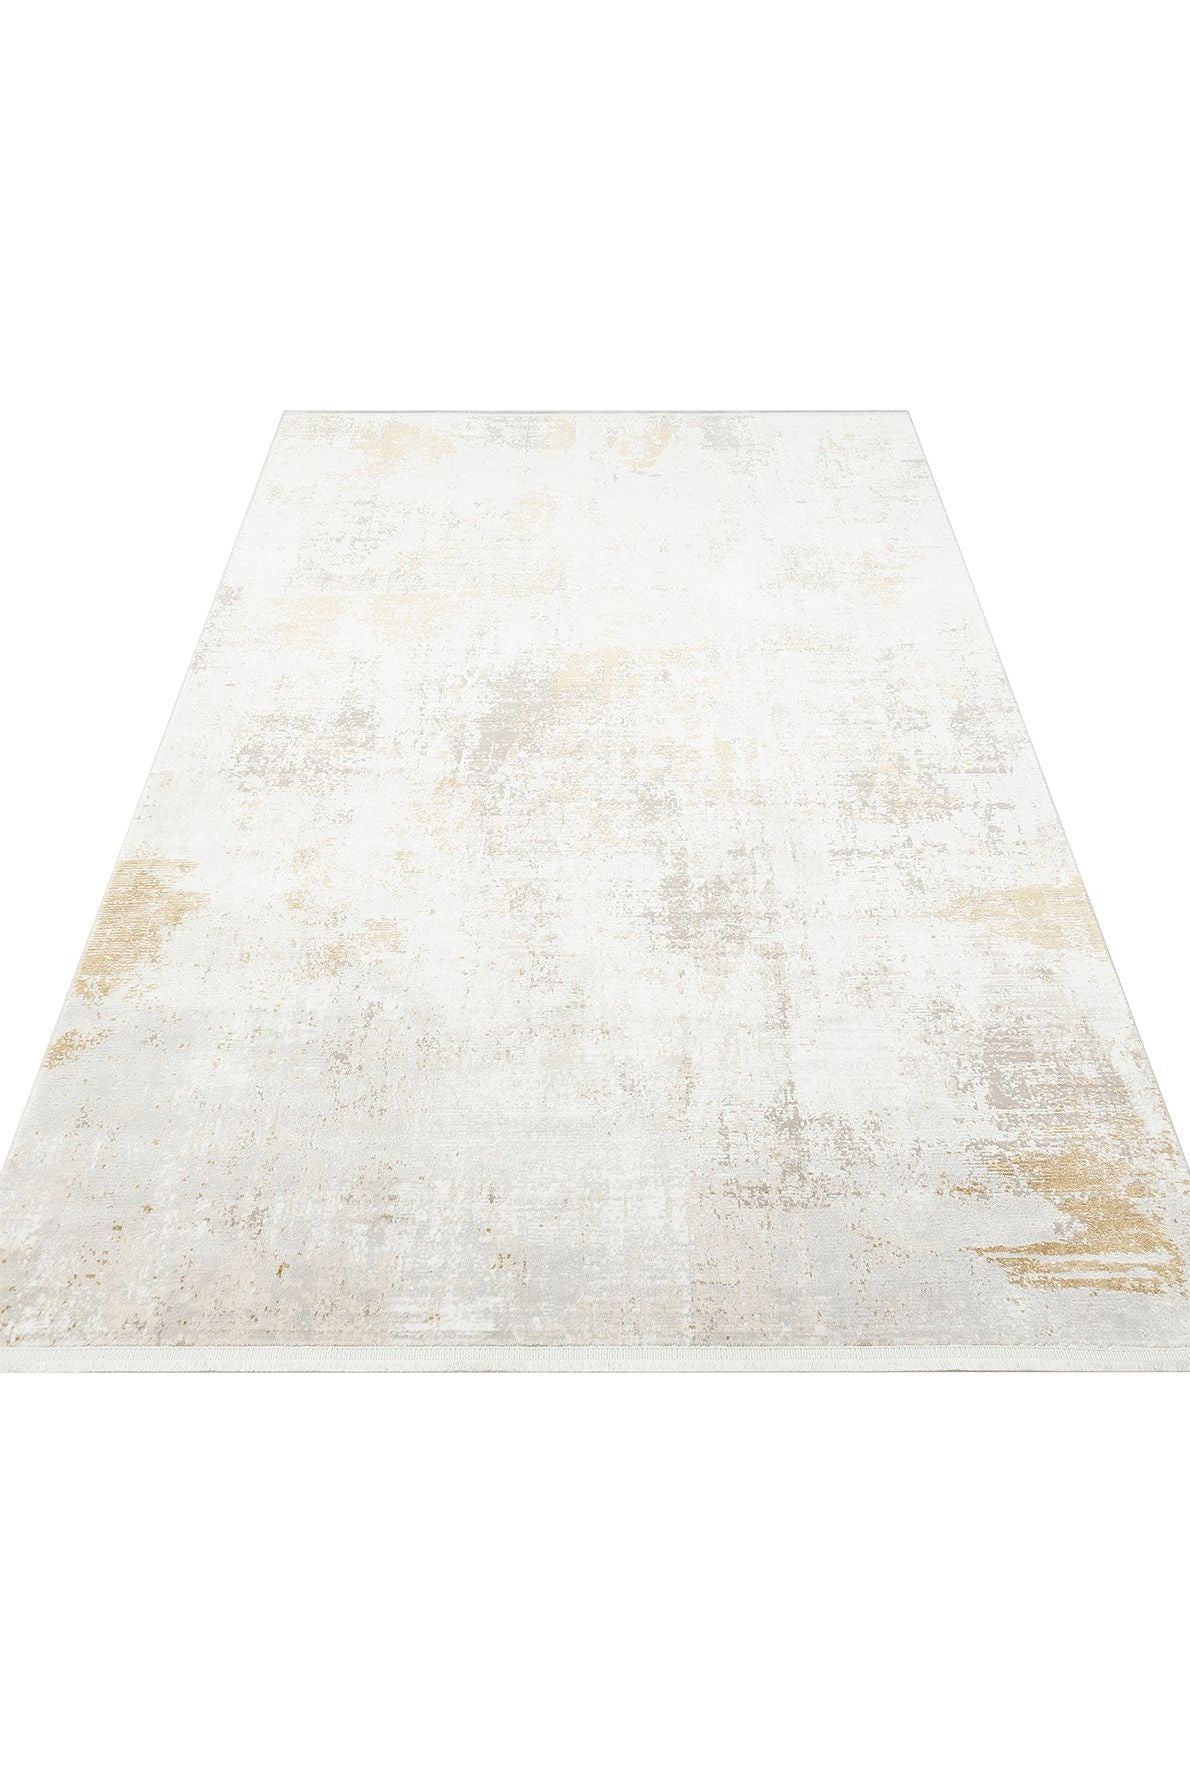 #Turkish_Carpets_Rugs# #Modern_Carpets# #Abrash_Carpets#Elegant Rugs With Acrylic And PolyesterZrh 06 Cream Yellow